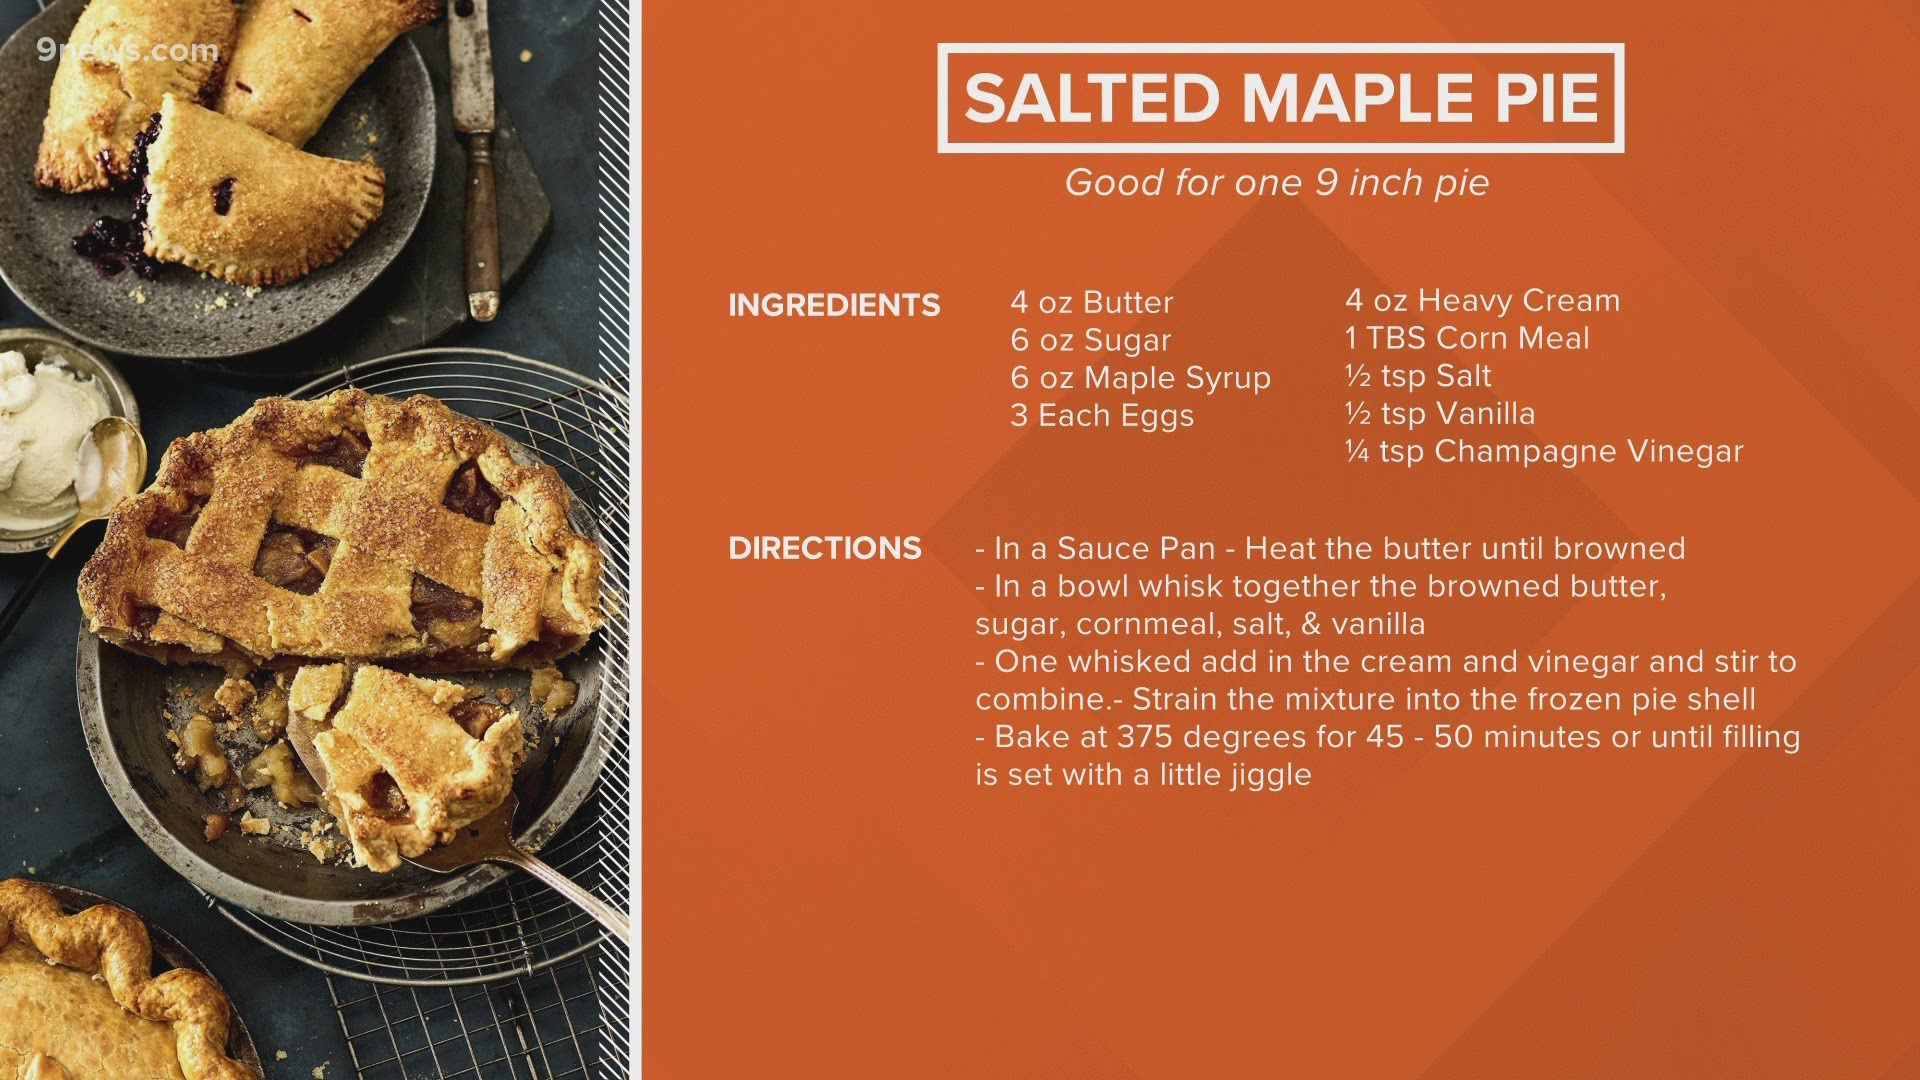 Local bakery Hinman's Pie shares a recipe for salted maple pie.